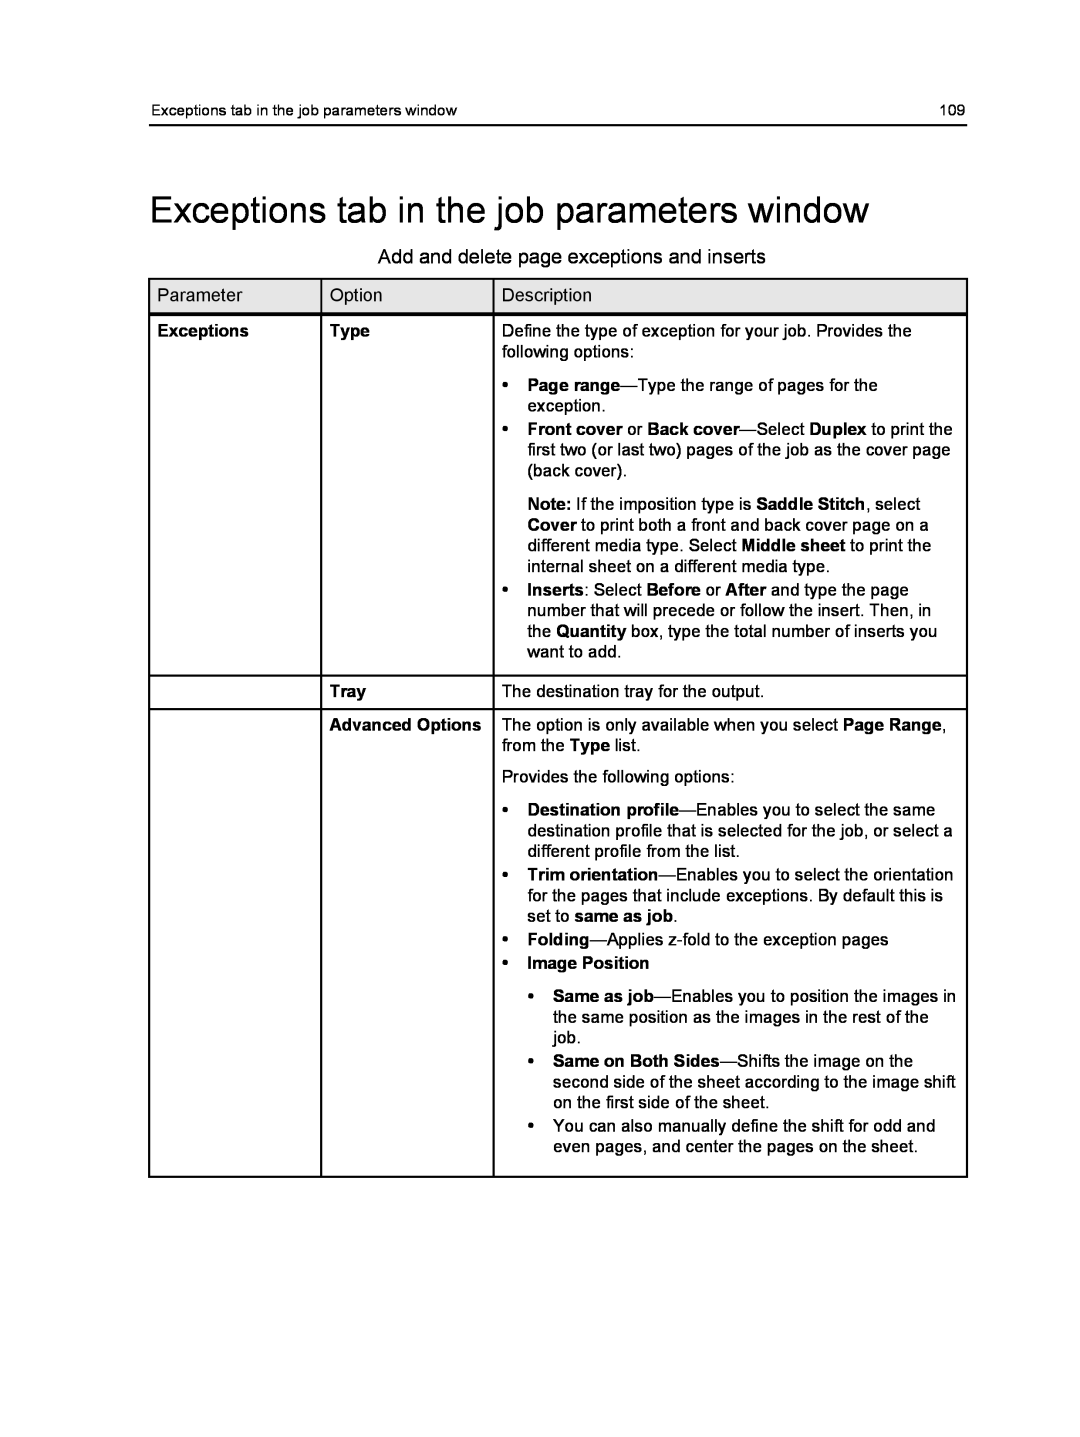 Xerox 550, 560 manual Exceptions tab in the job parameters window, Add and delete page exceptions and inserts 